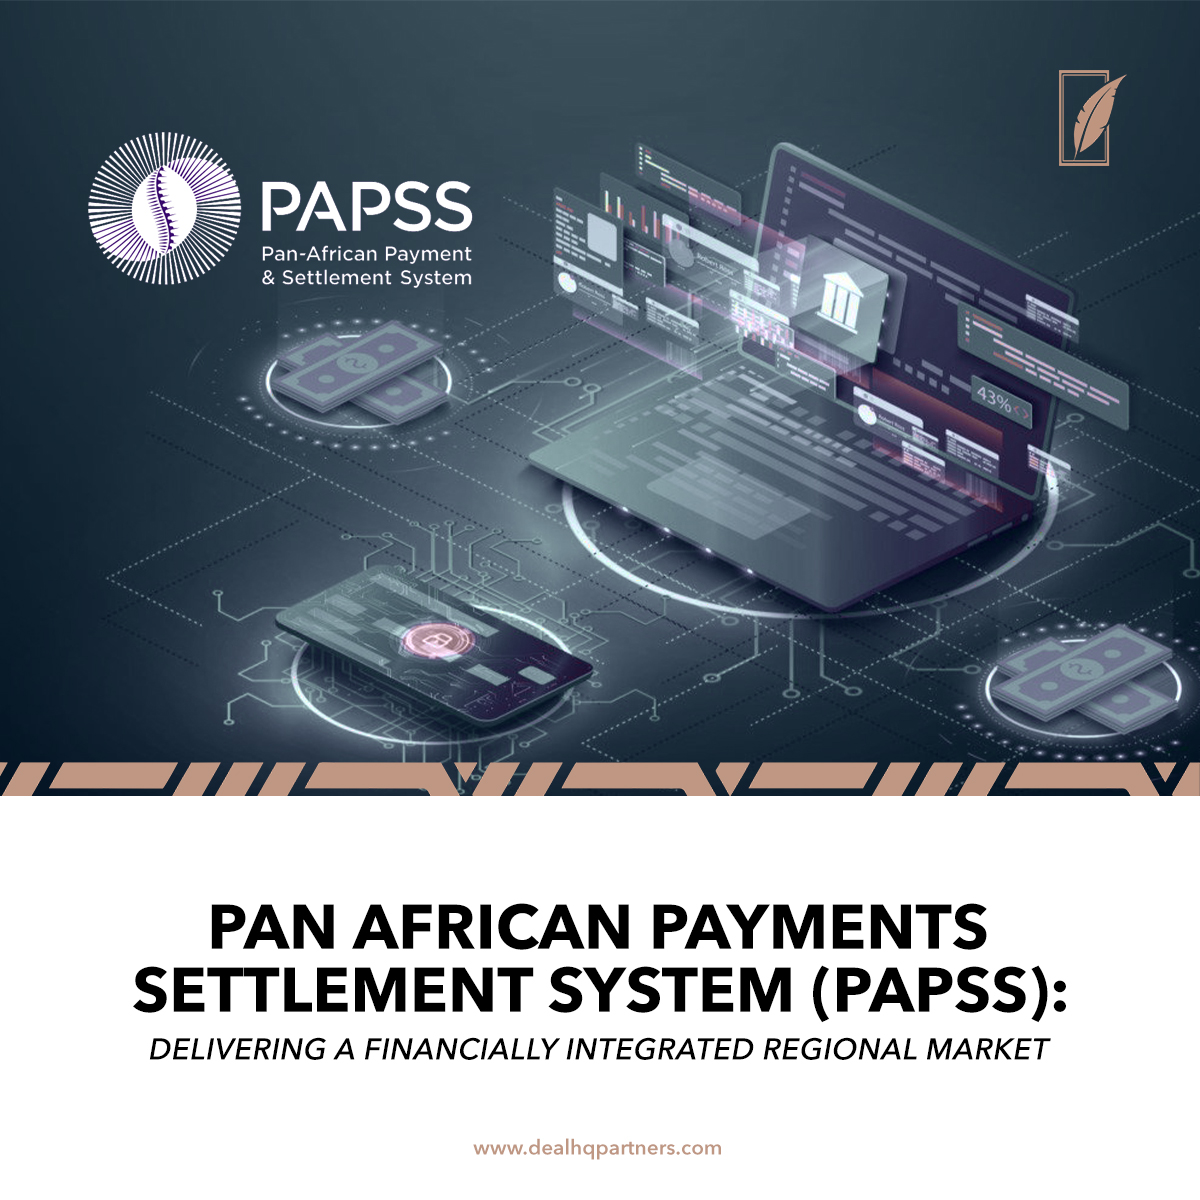 PAN AFRICAN PAYMENTS SETTLEMENT SYSTEM (PAPSS)